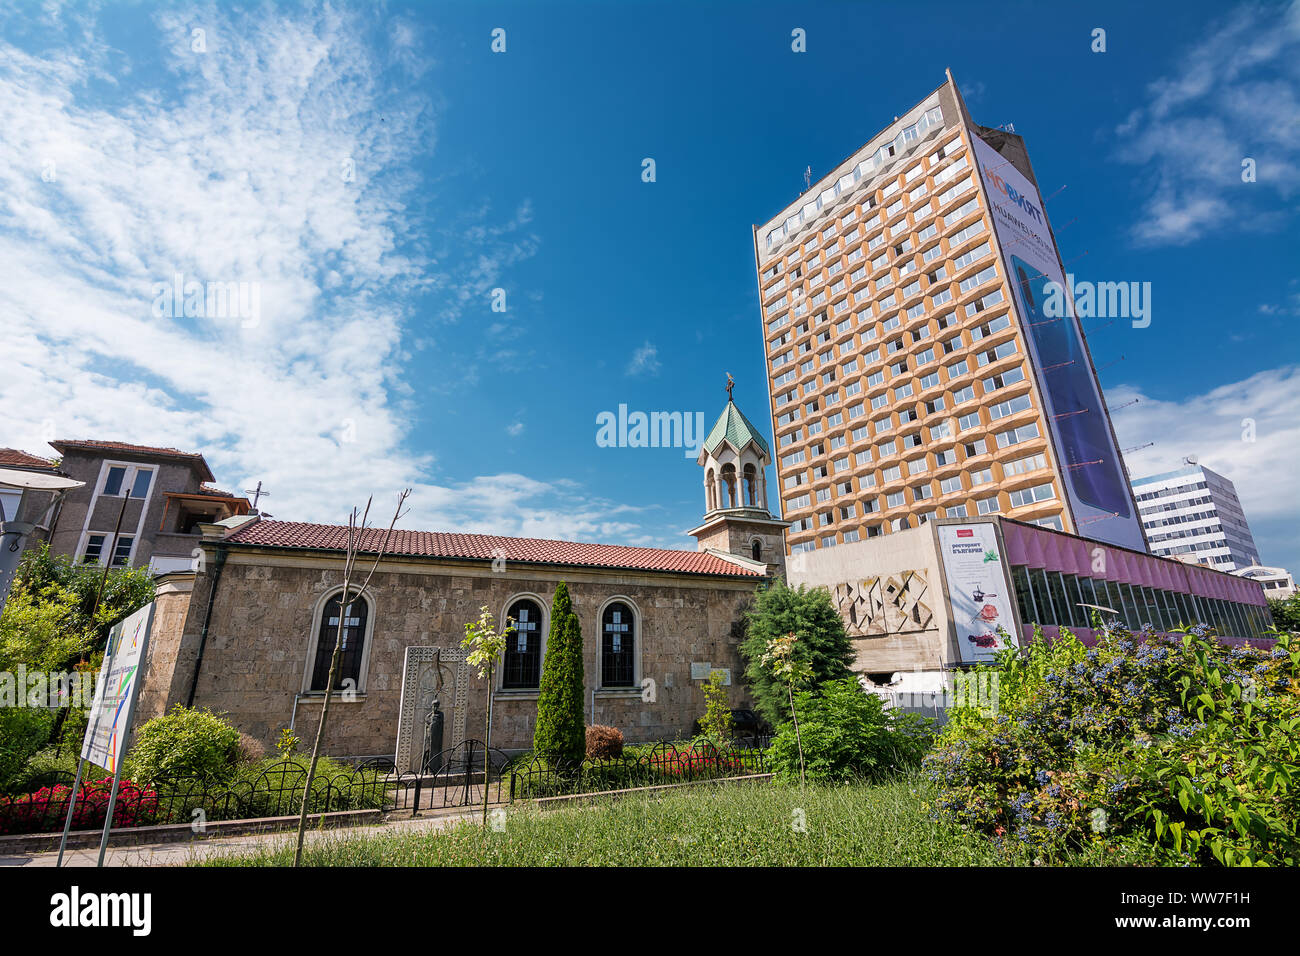 Burgas, Bulgaria - June 22, 2019: Architectural contrasts with an ancient Armenian church and a modern building in the center of Burgas, Bulgaria Stock Photo